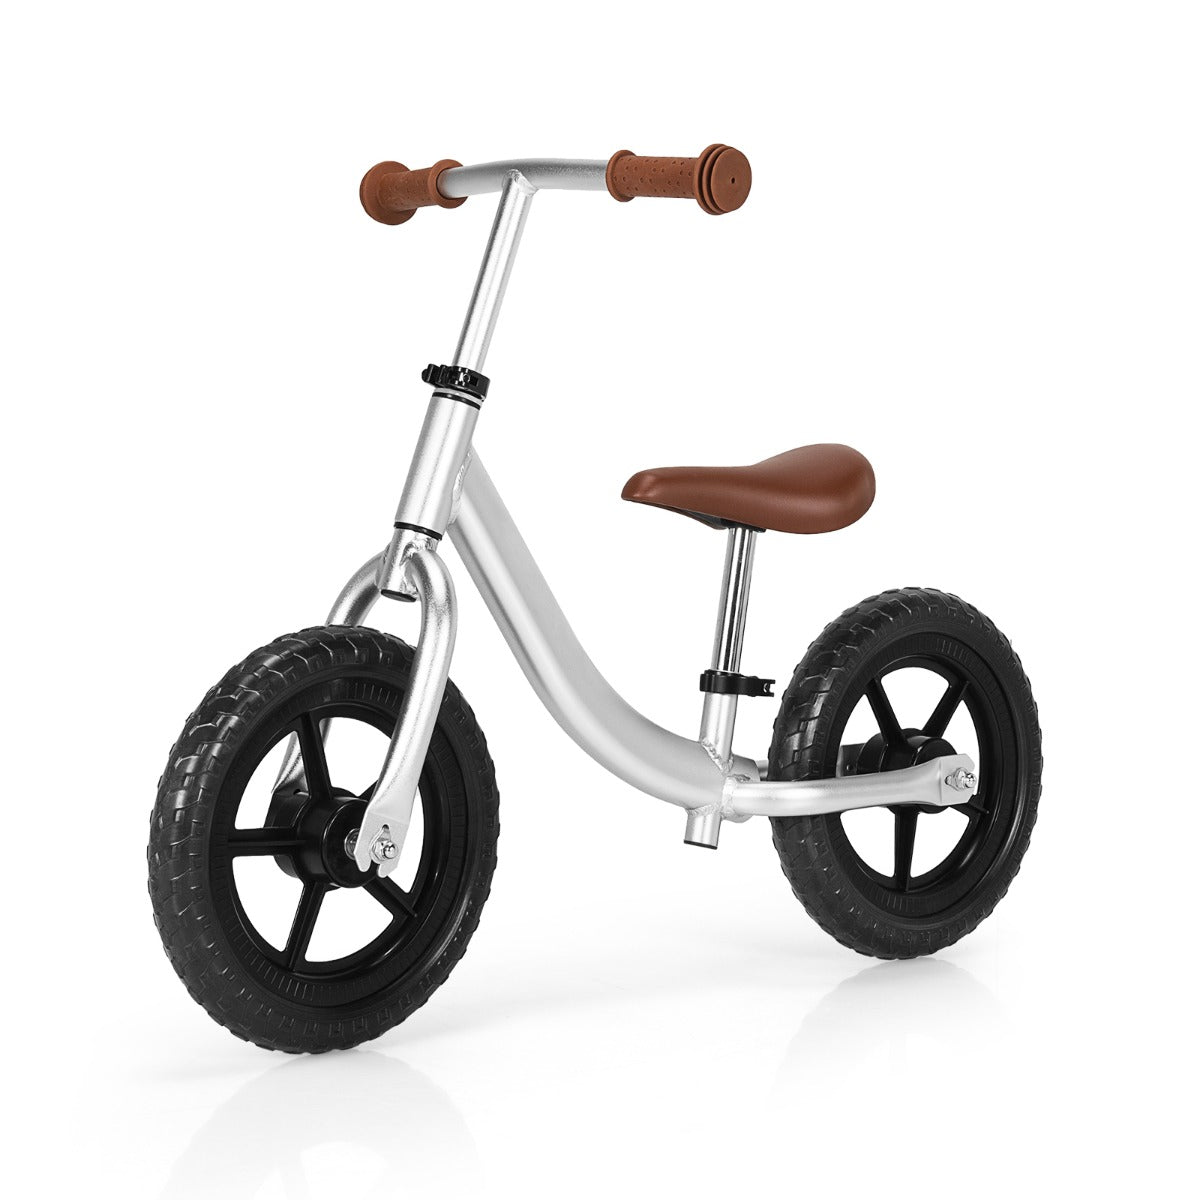 Little Learners' Bike: Kids No Pedal Training Bicycle with Adjustable Features